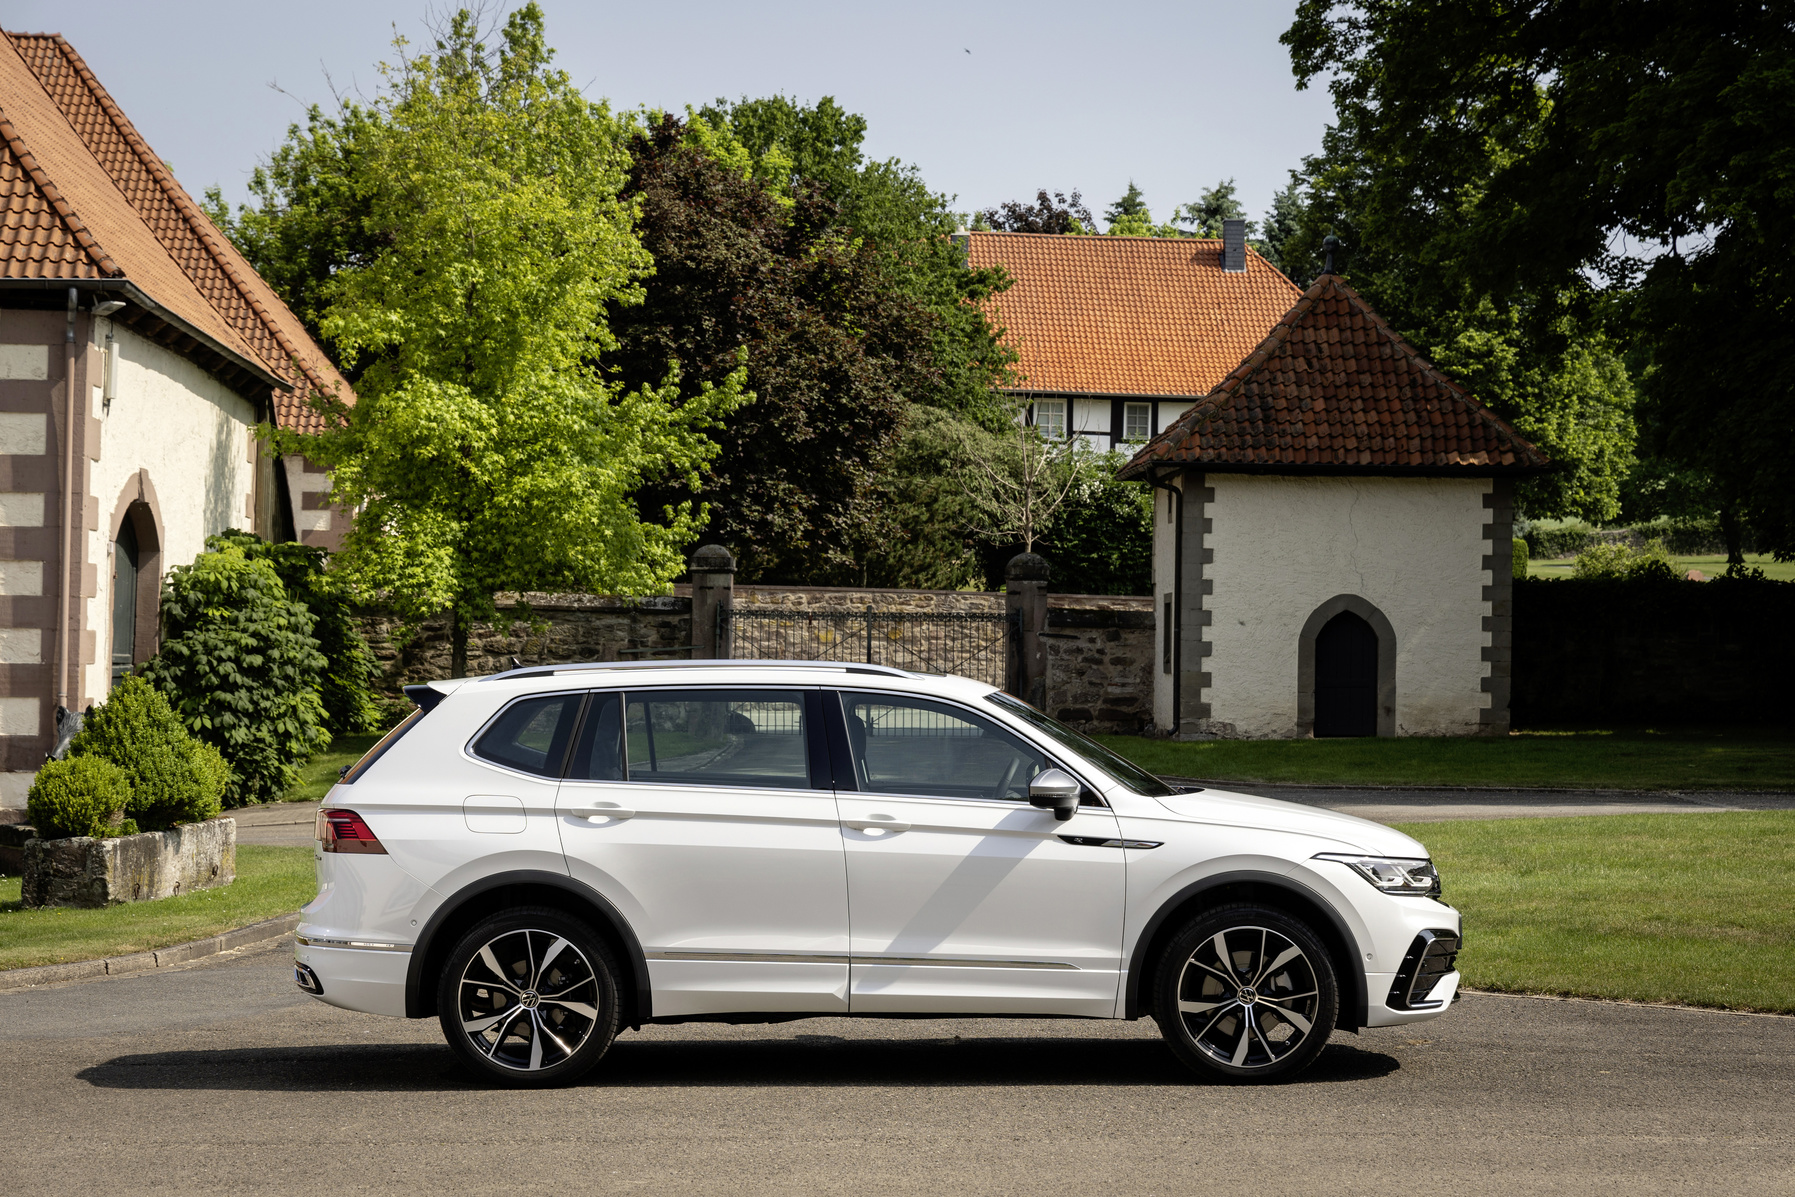 New Car Review: Volkswagen Tiguan Allspace R-Line - The AA